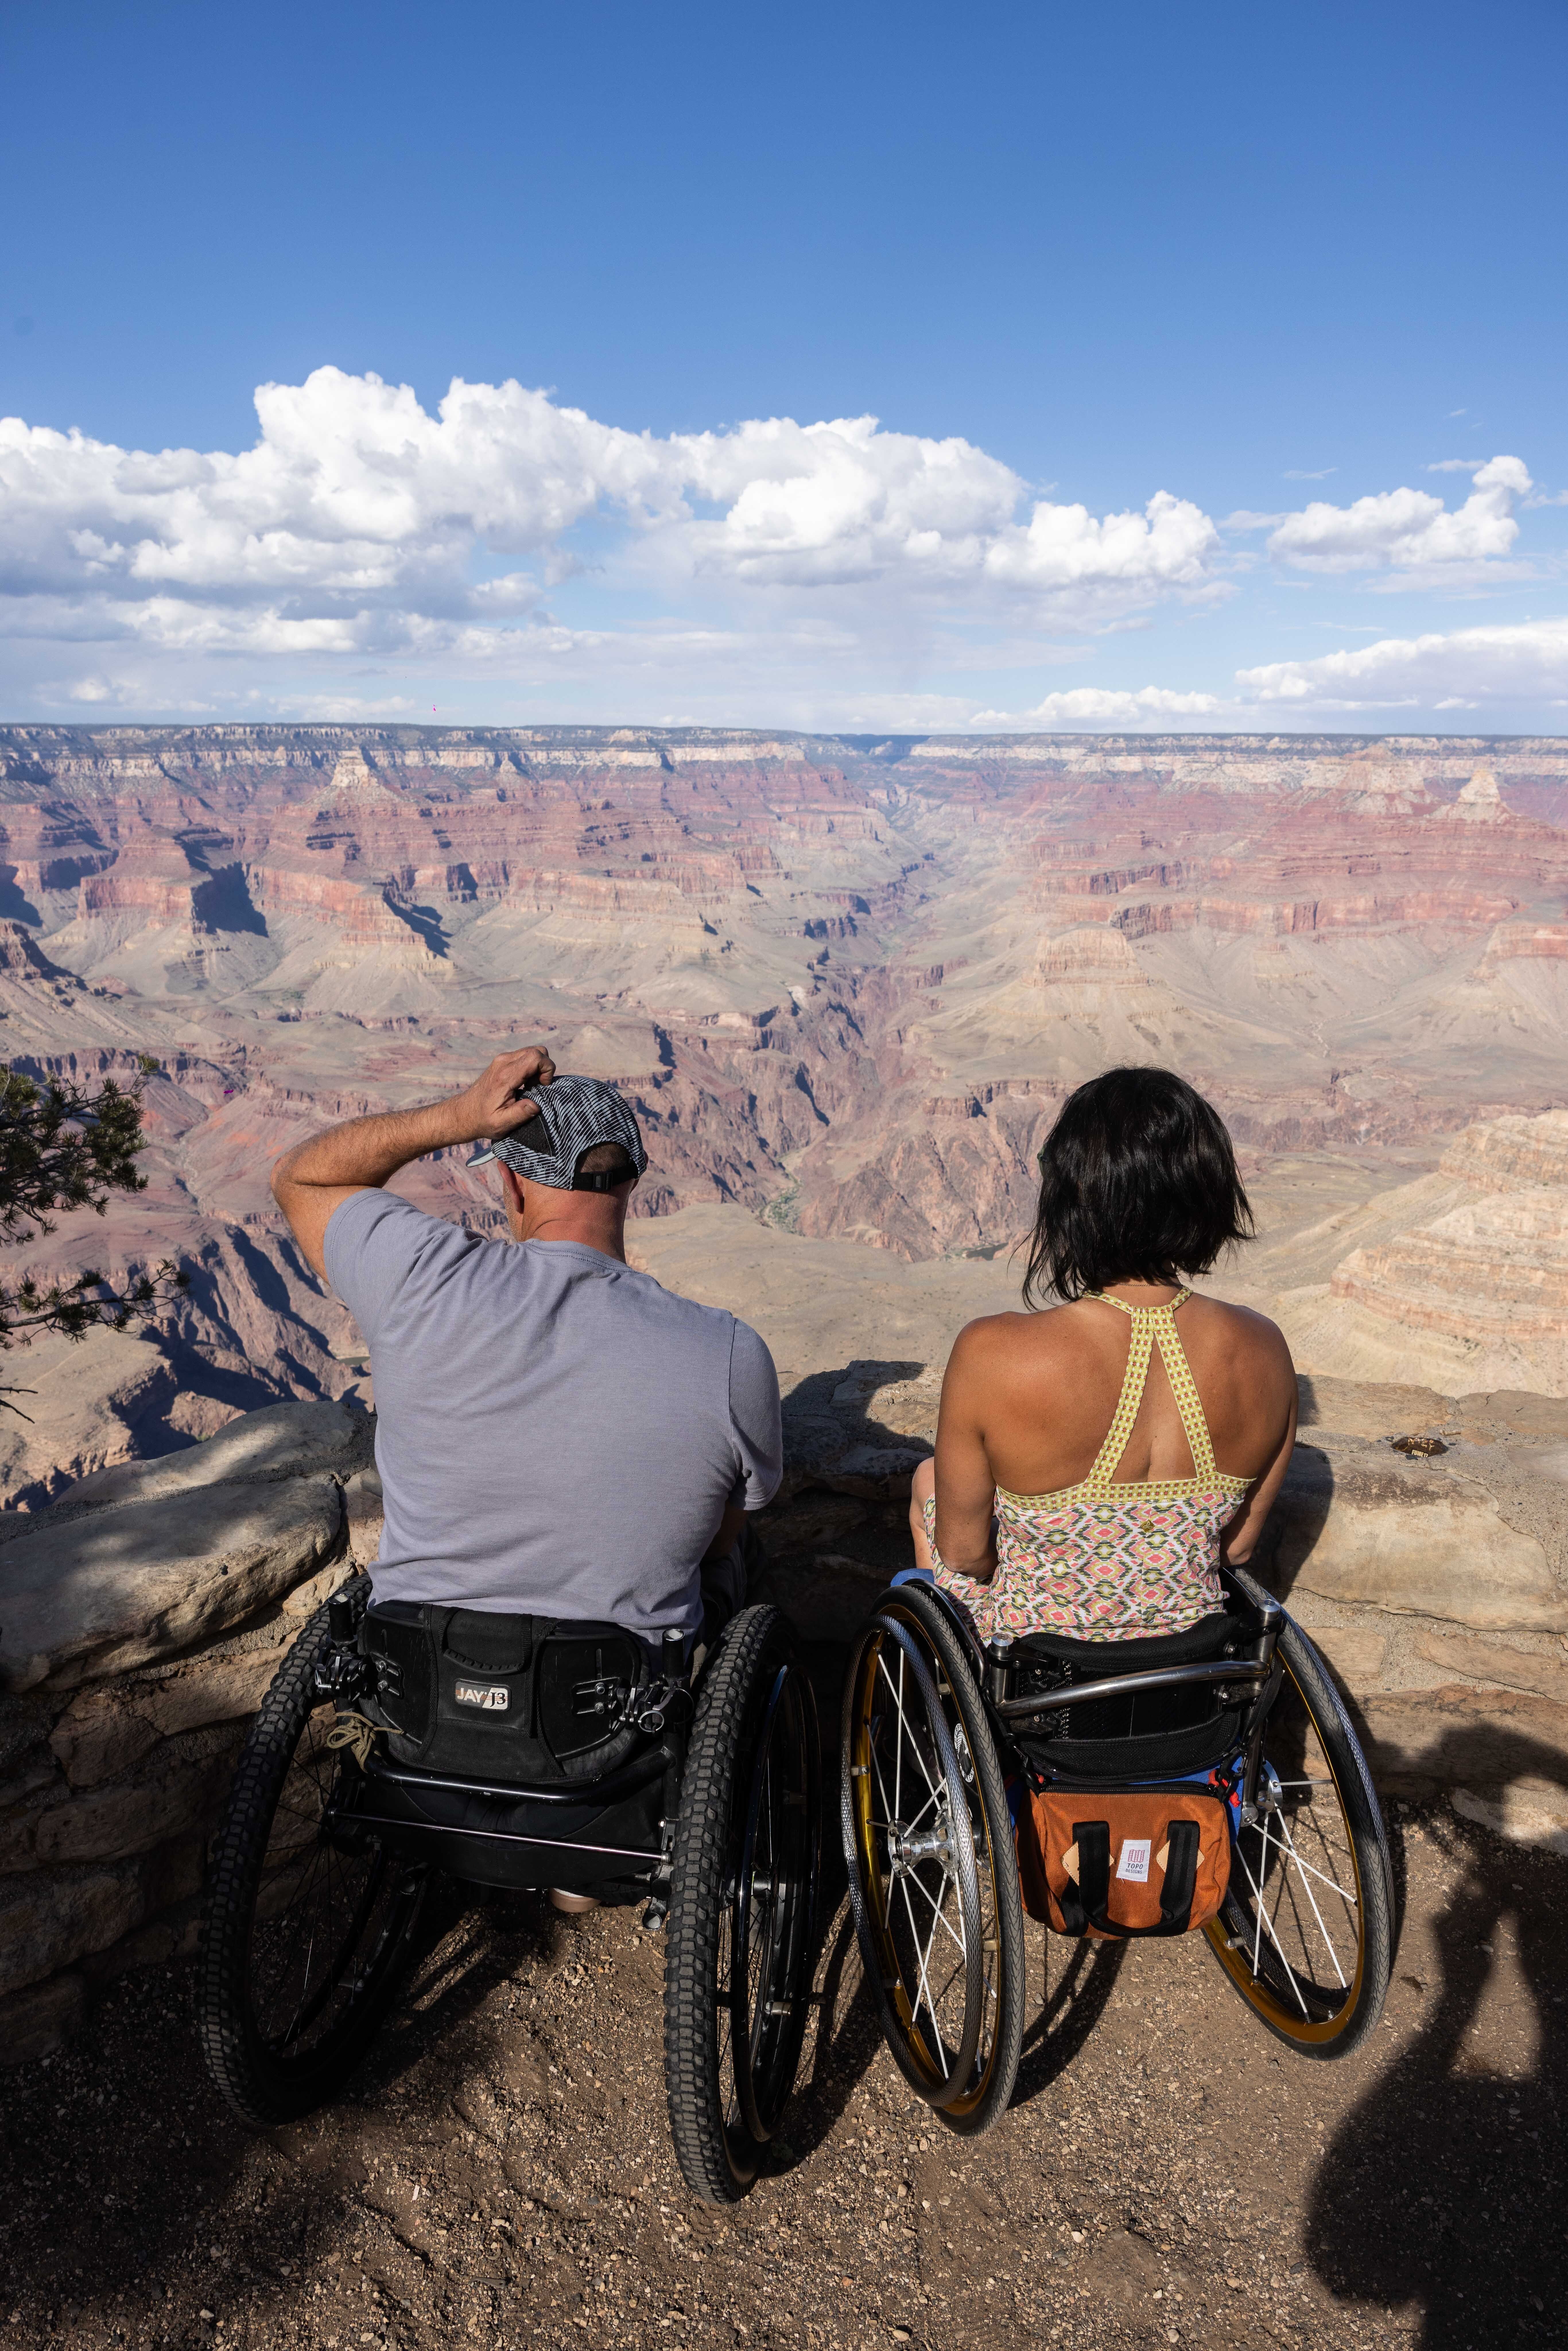 Crossing the Vastness: An Adaptive Team’s Journey from Rim to Rim of the Grand Canyon